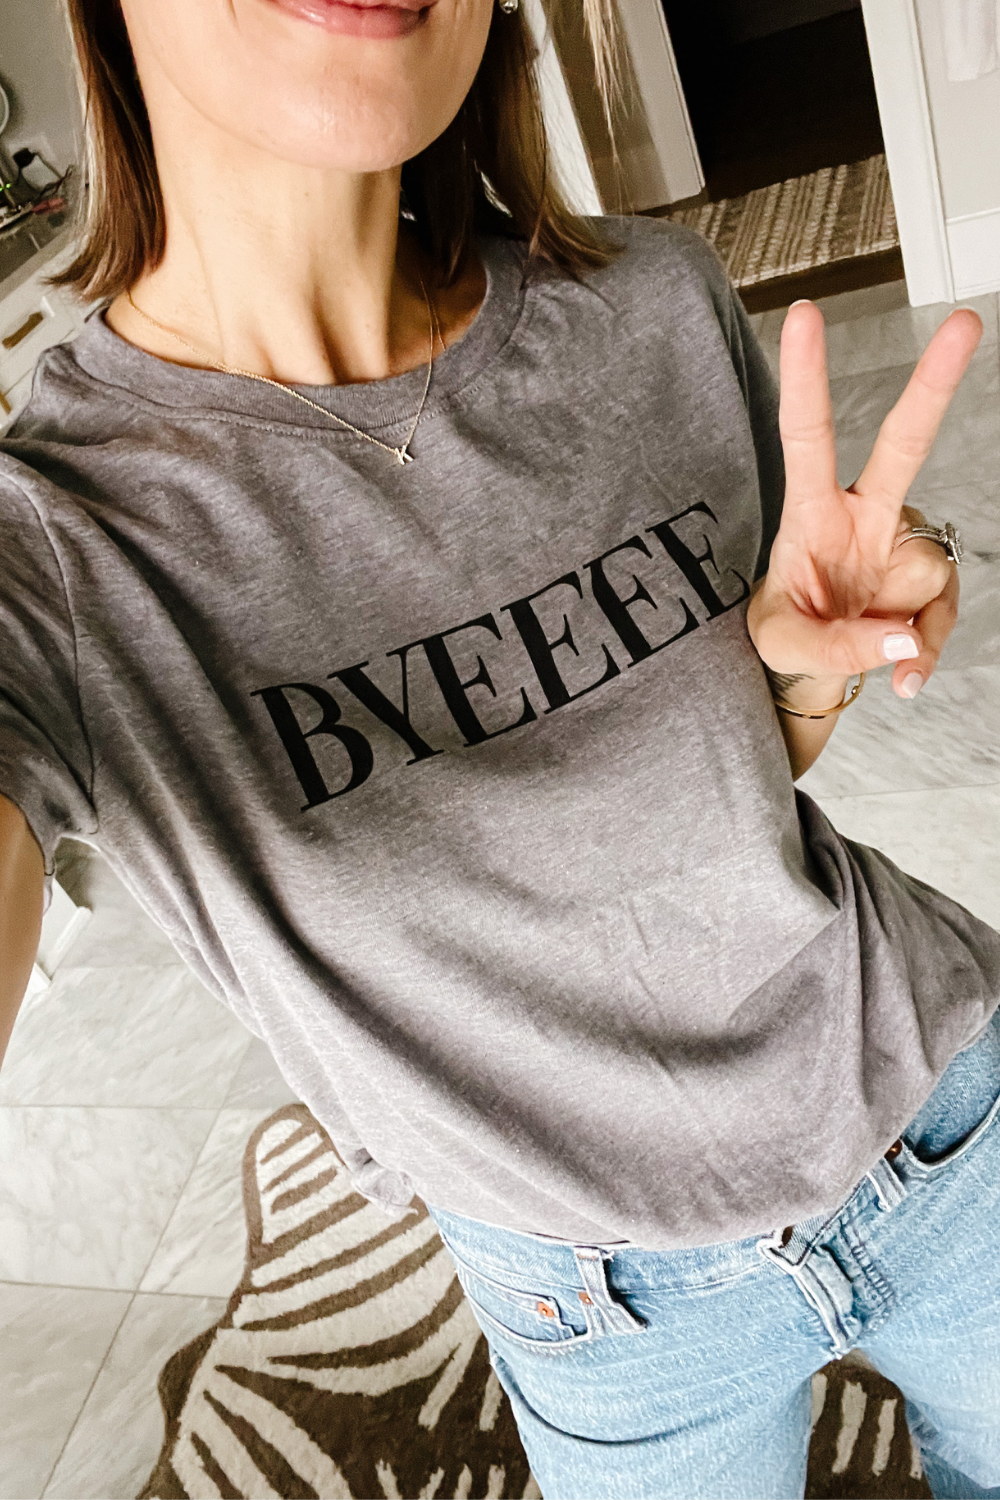 Suzanne wearing a "Byeeee" graphic tee and denim